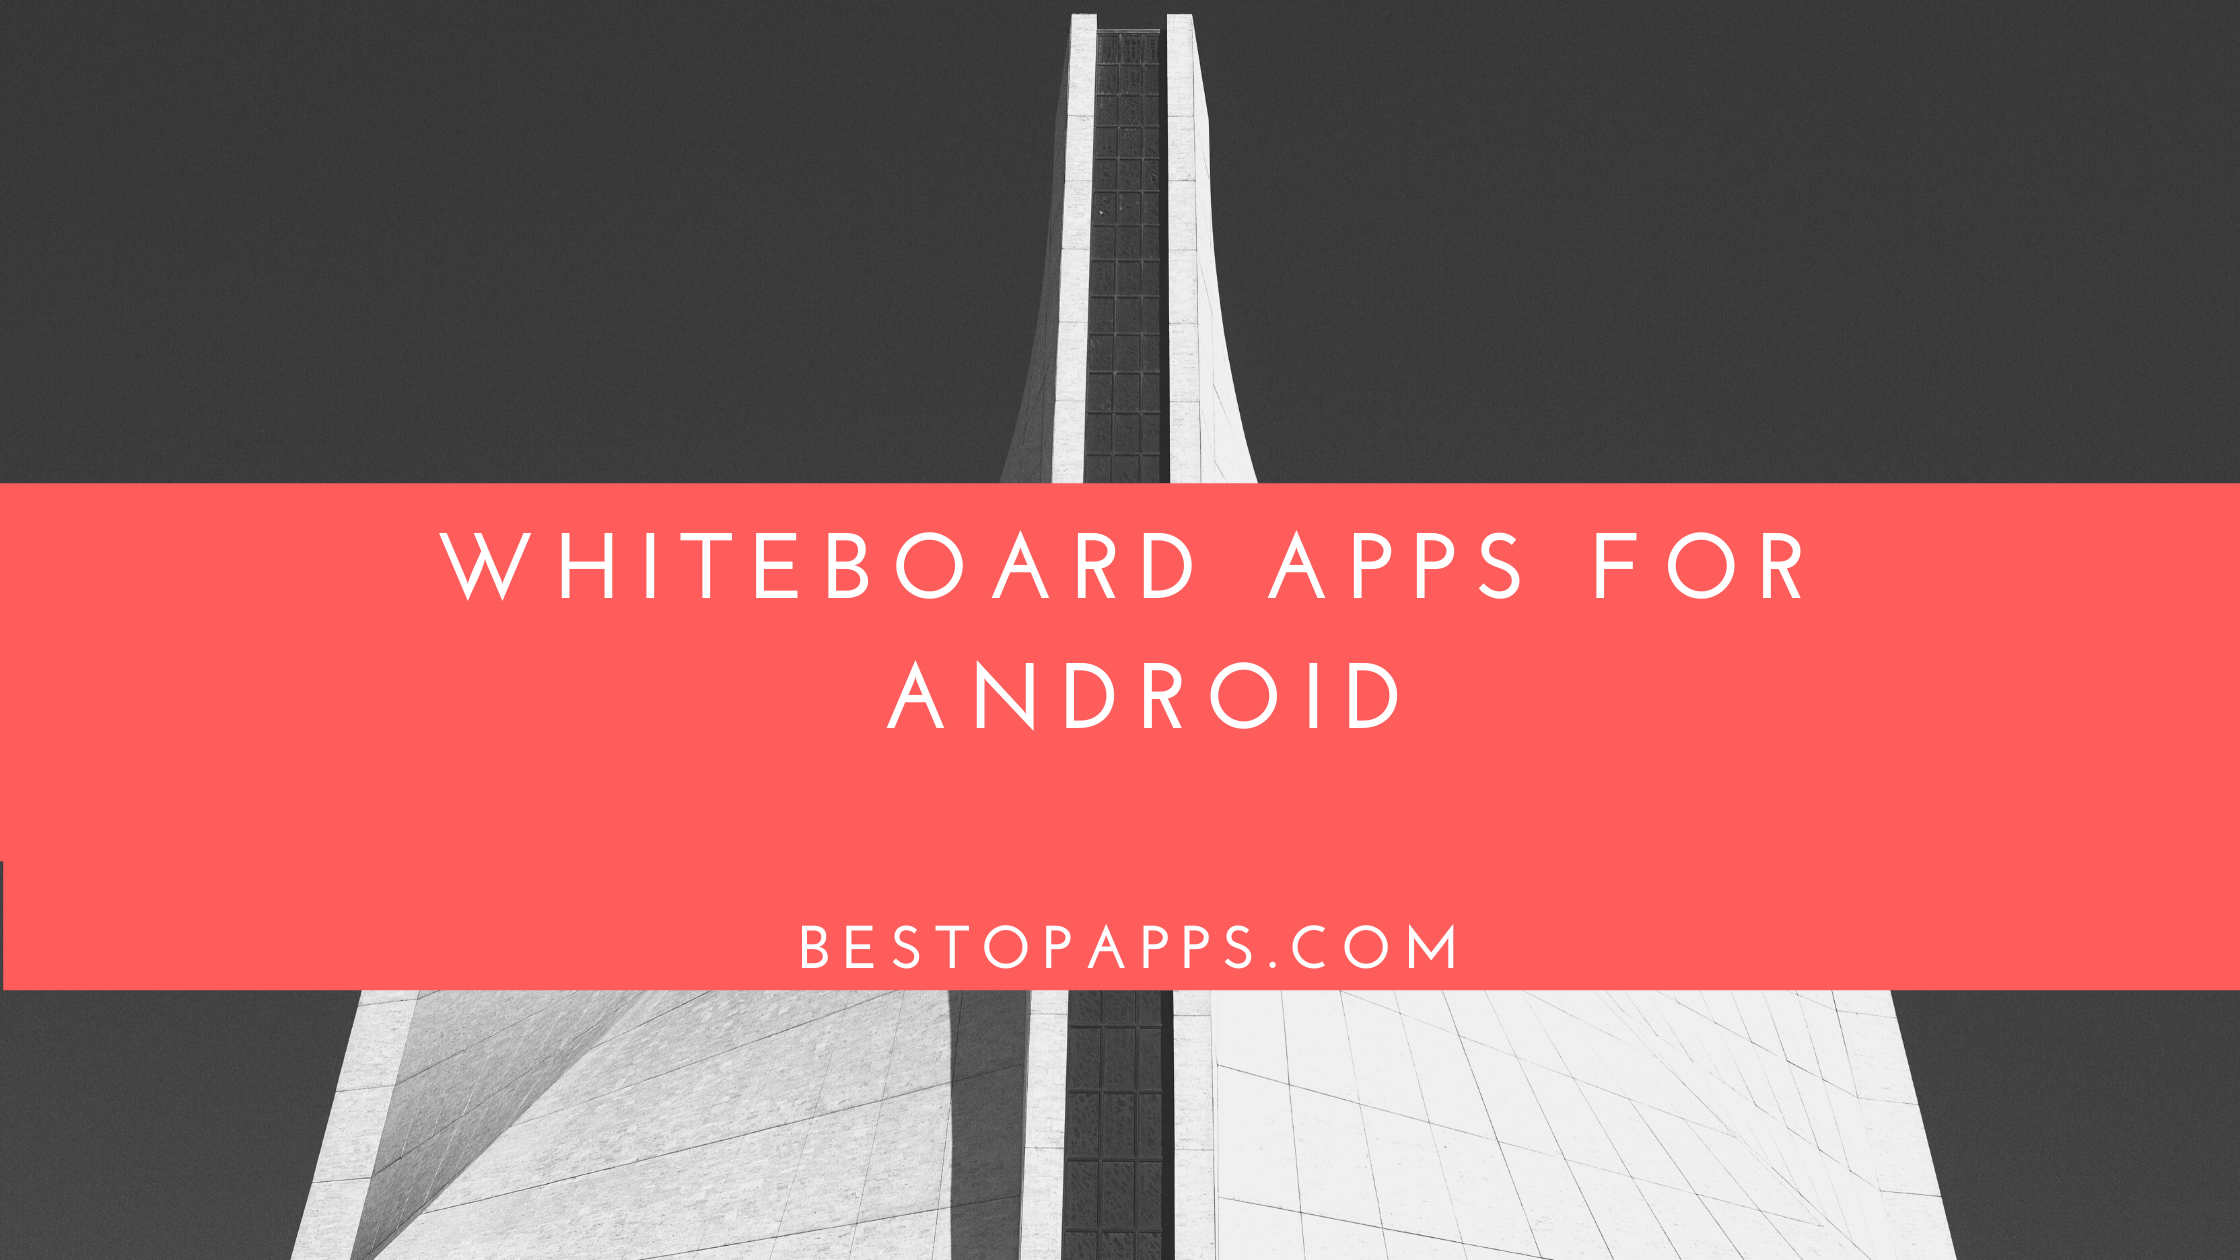 Whiteboard Apps for Android